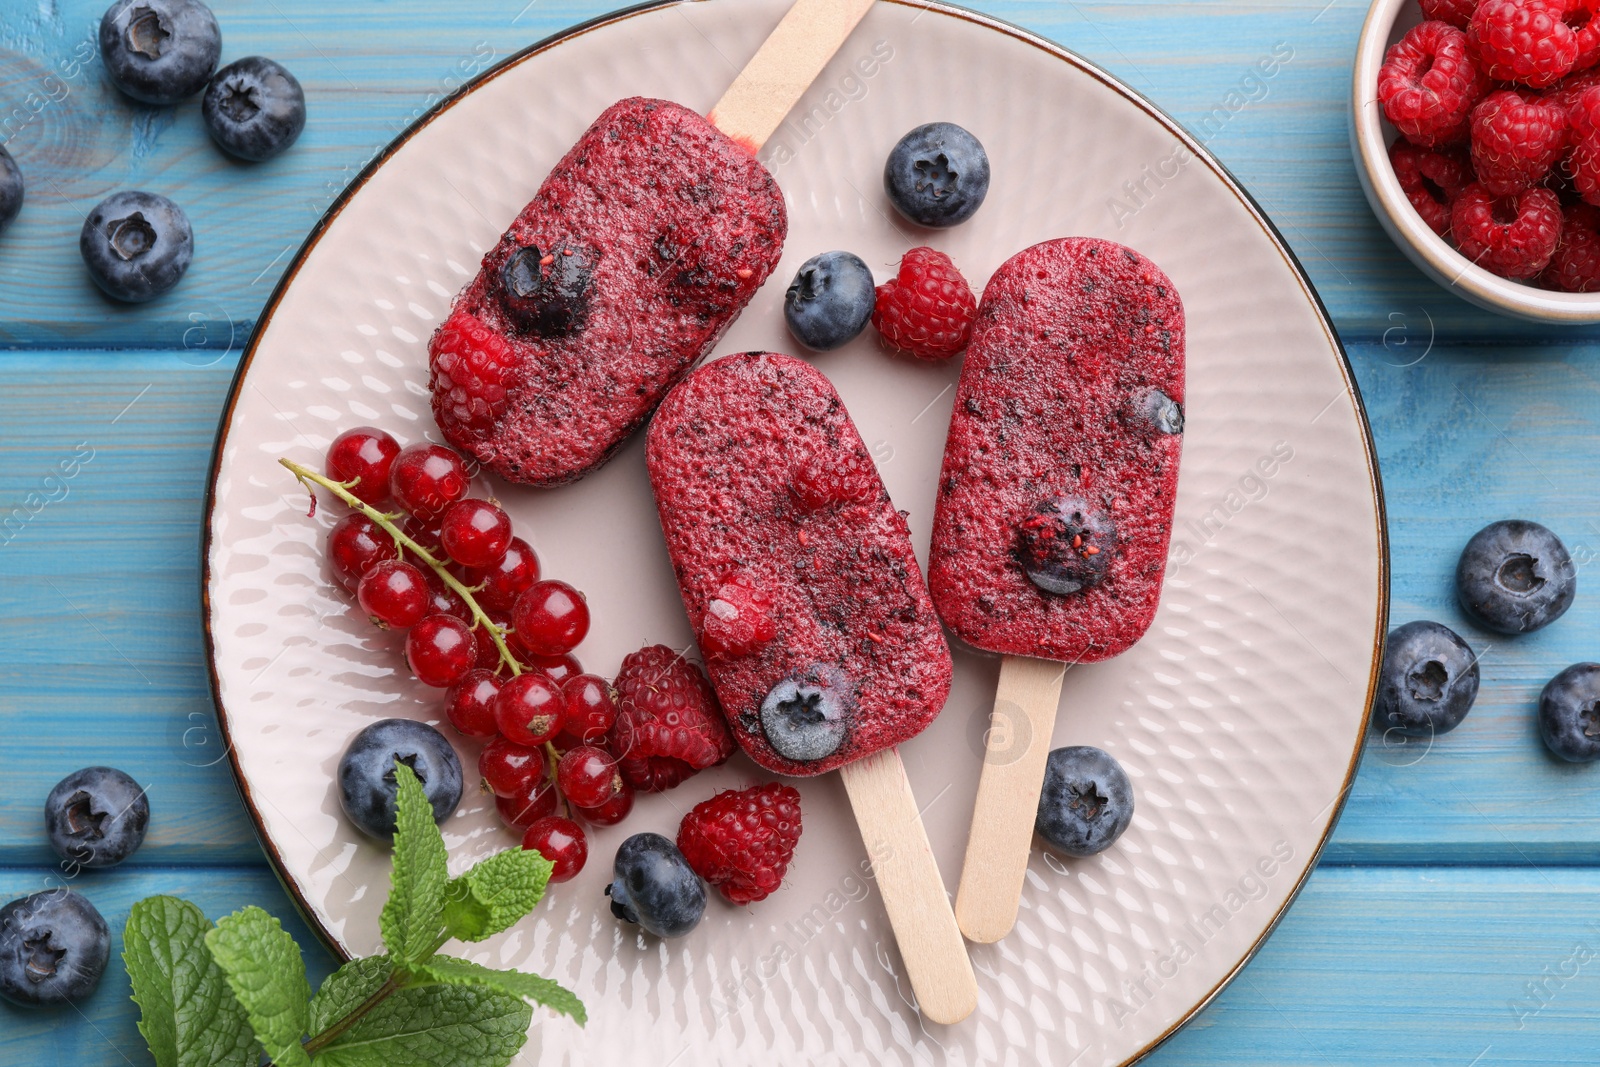 Photo of Plate of tasty berry ice pops on light blue wooden table, flat lay. Fruit popsicle